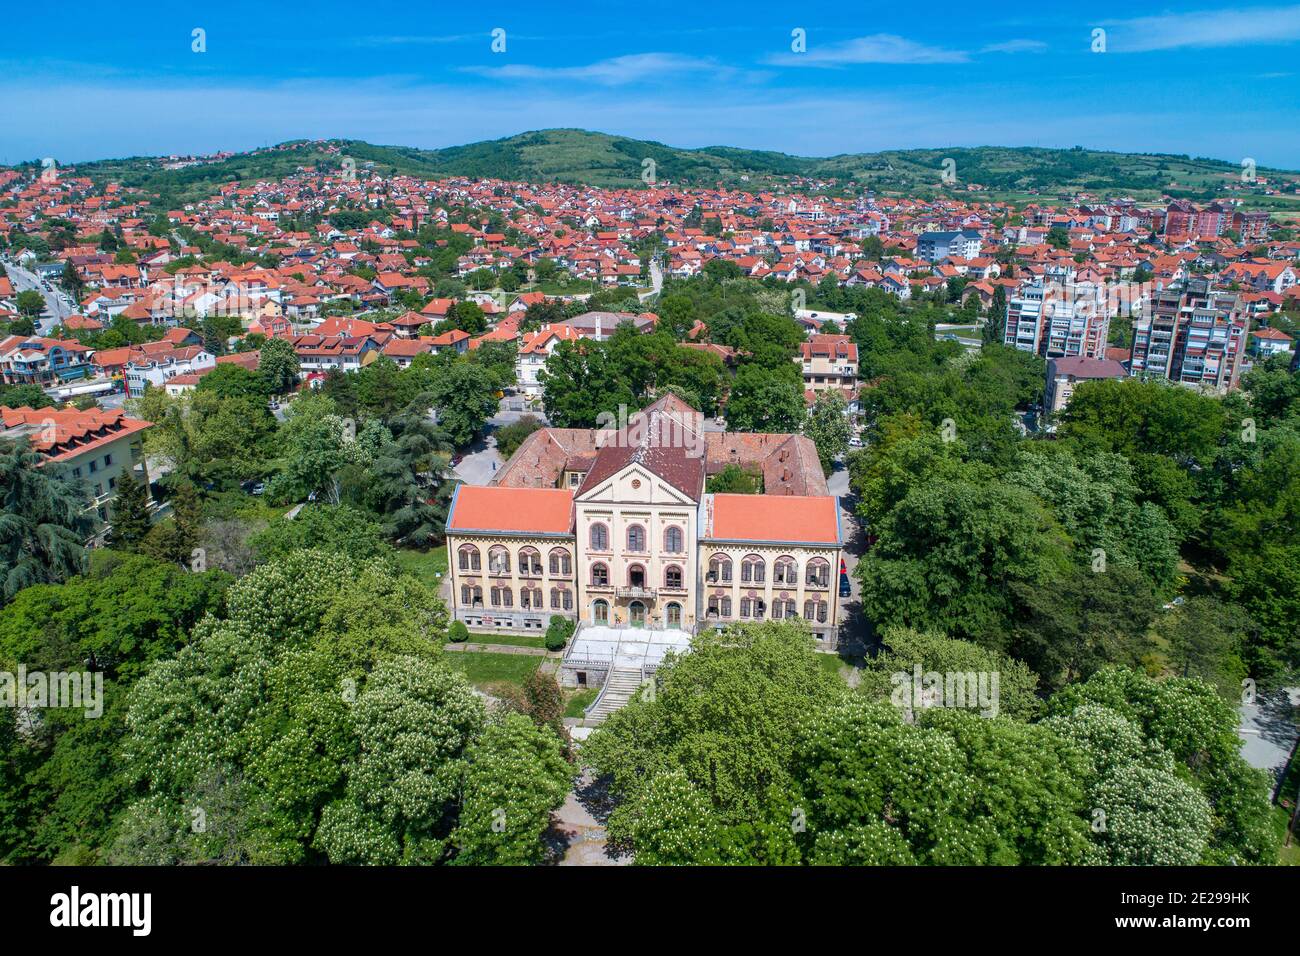 Aerial view of Arandjelovac, Park and castle in City in Sumadija, Central Serbia Stock Photo